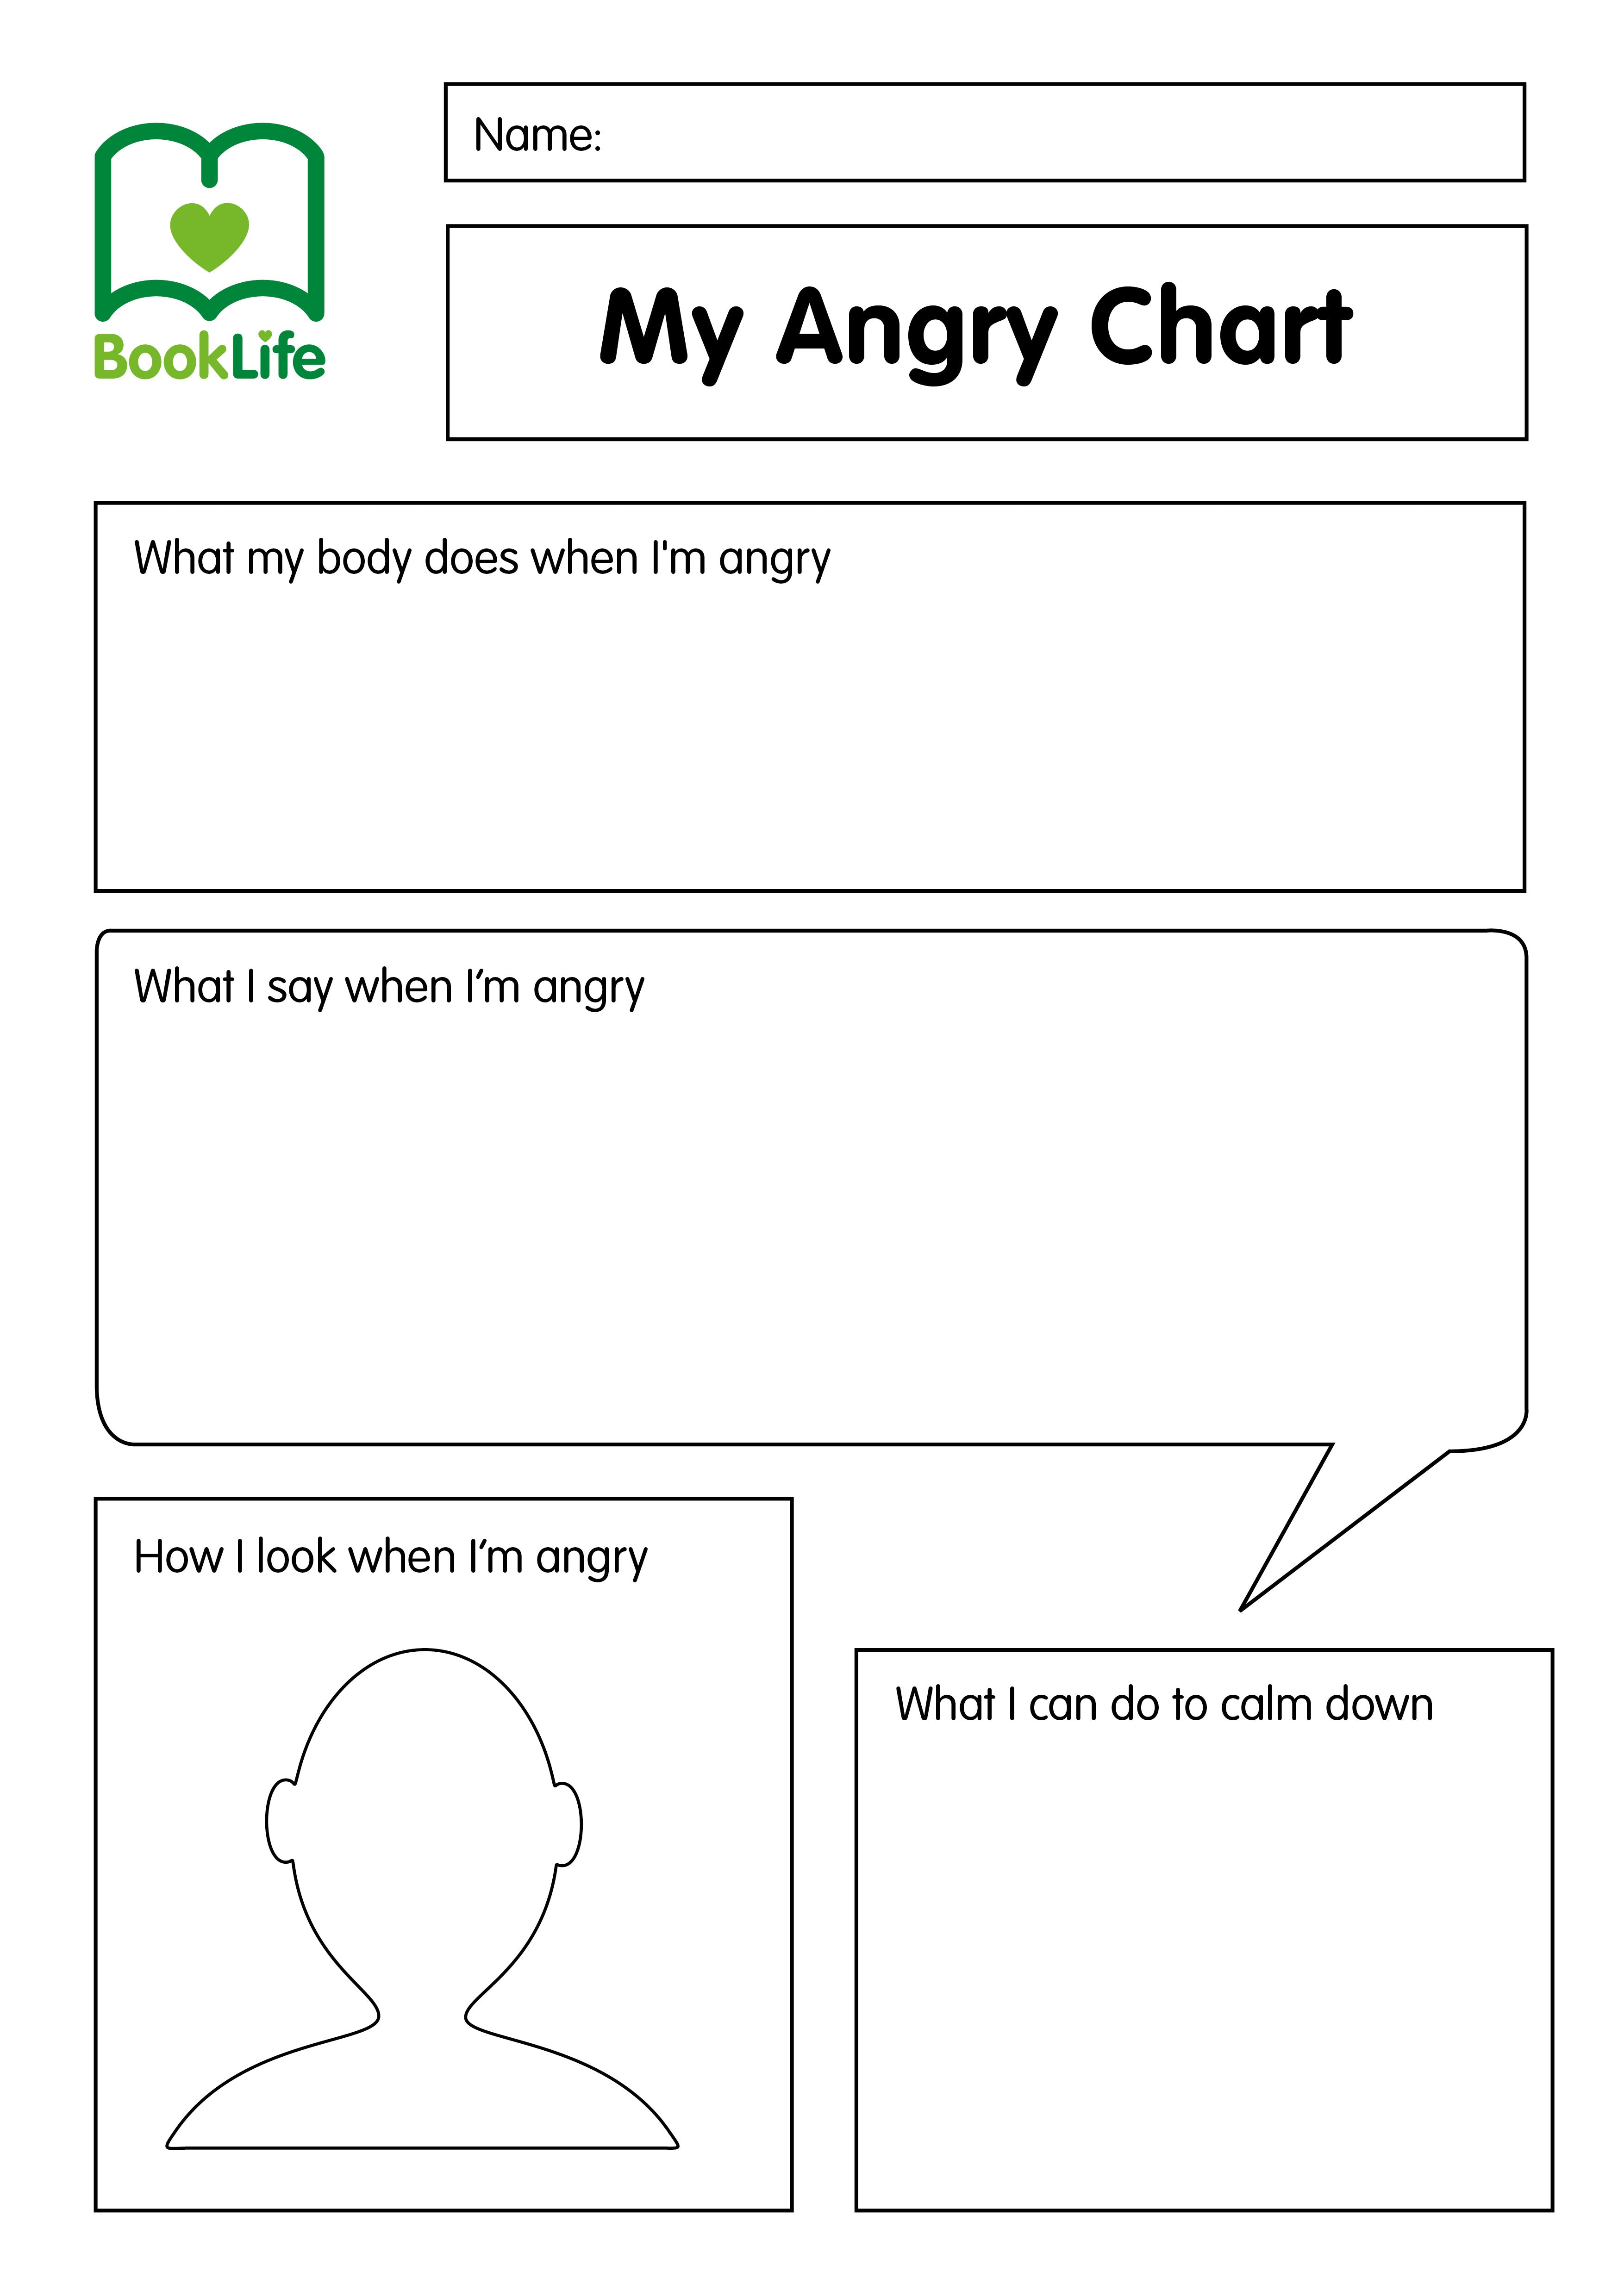 Free My Angry Chart by BookLife